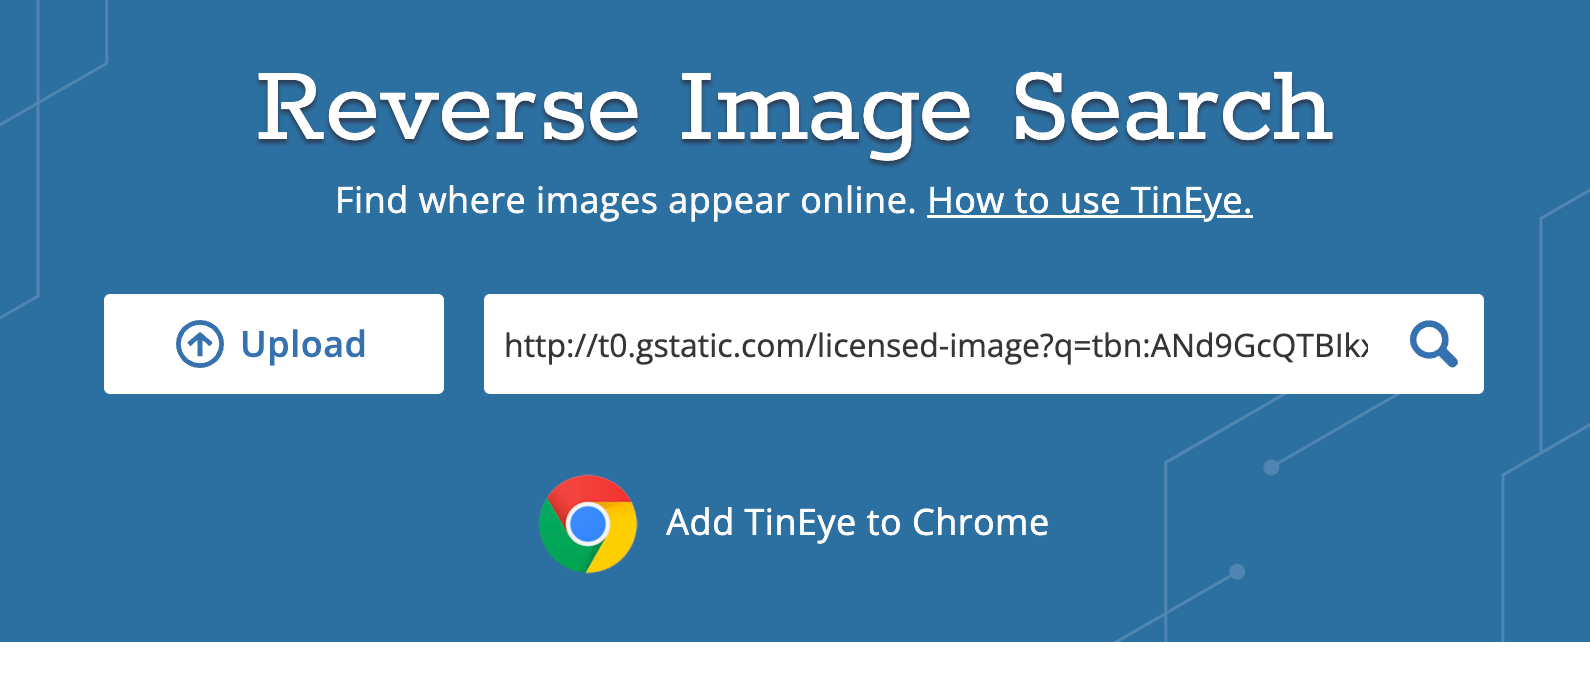 How to Perform a Reverse Image Search on Google Desktop